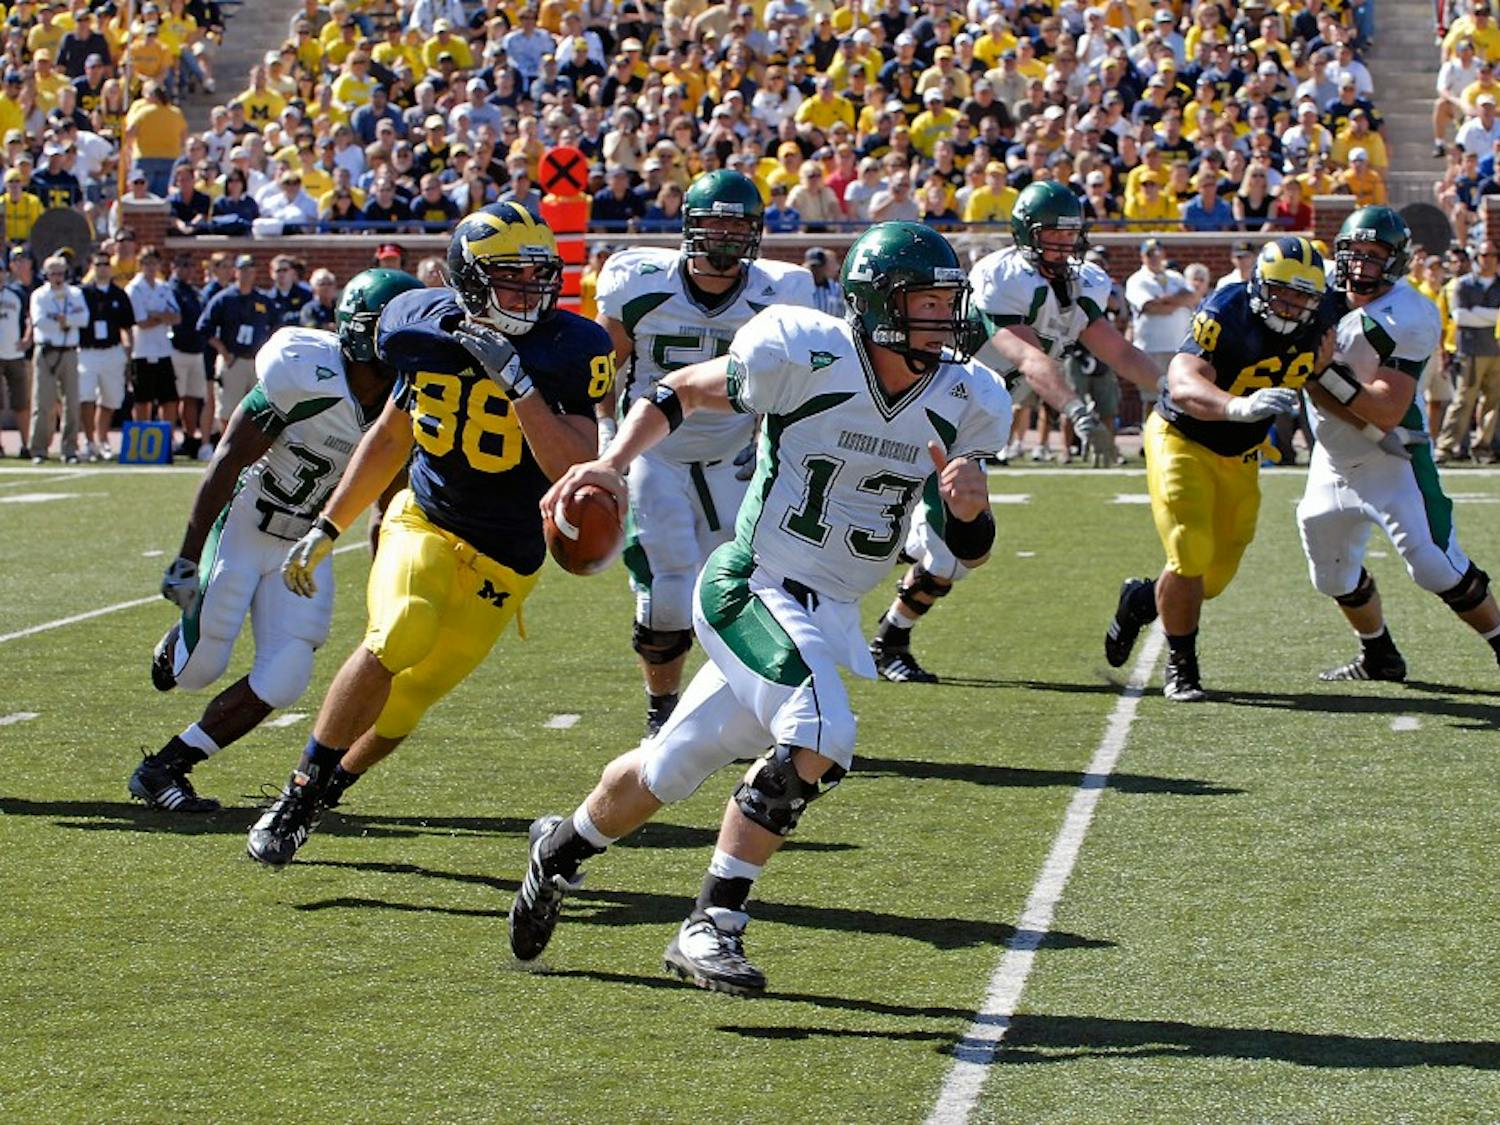 	Alex Gillett (13) under pressure from linebacker (88) Craig Roh during EMU’s 45-17 loss to Michigan on Sept. 19 when he filled in for the injured Andy Schmitt. Gillett will share playing time with Kyle McMahon on Saturday, coach Ron English said.